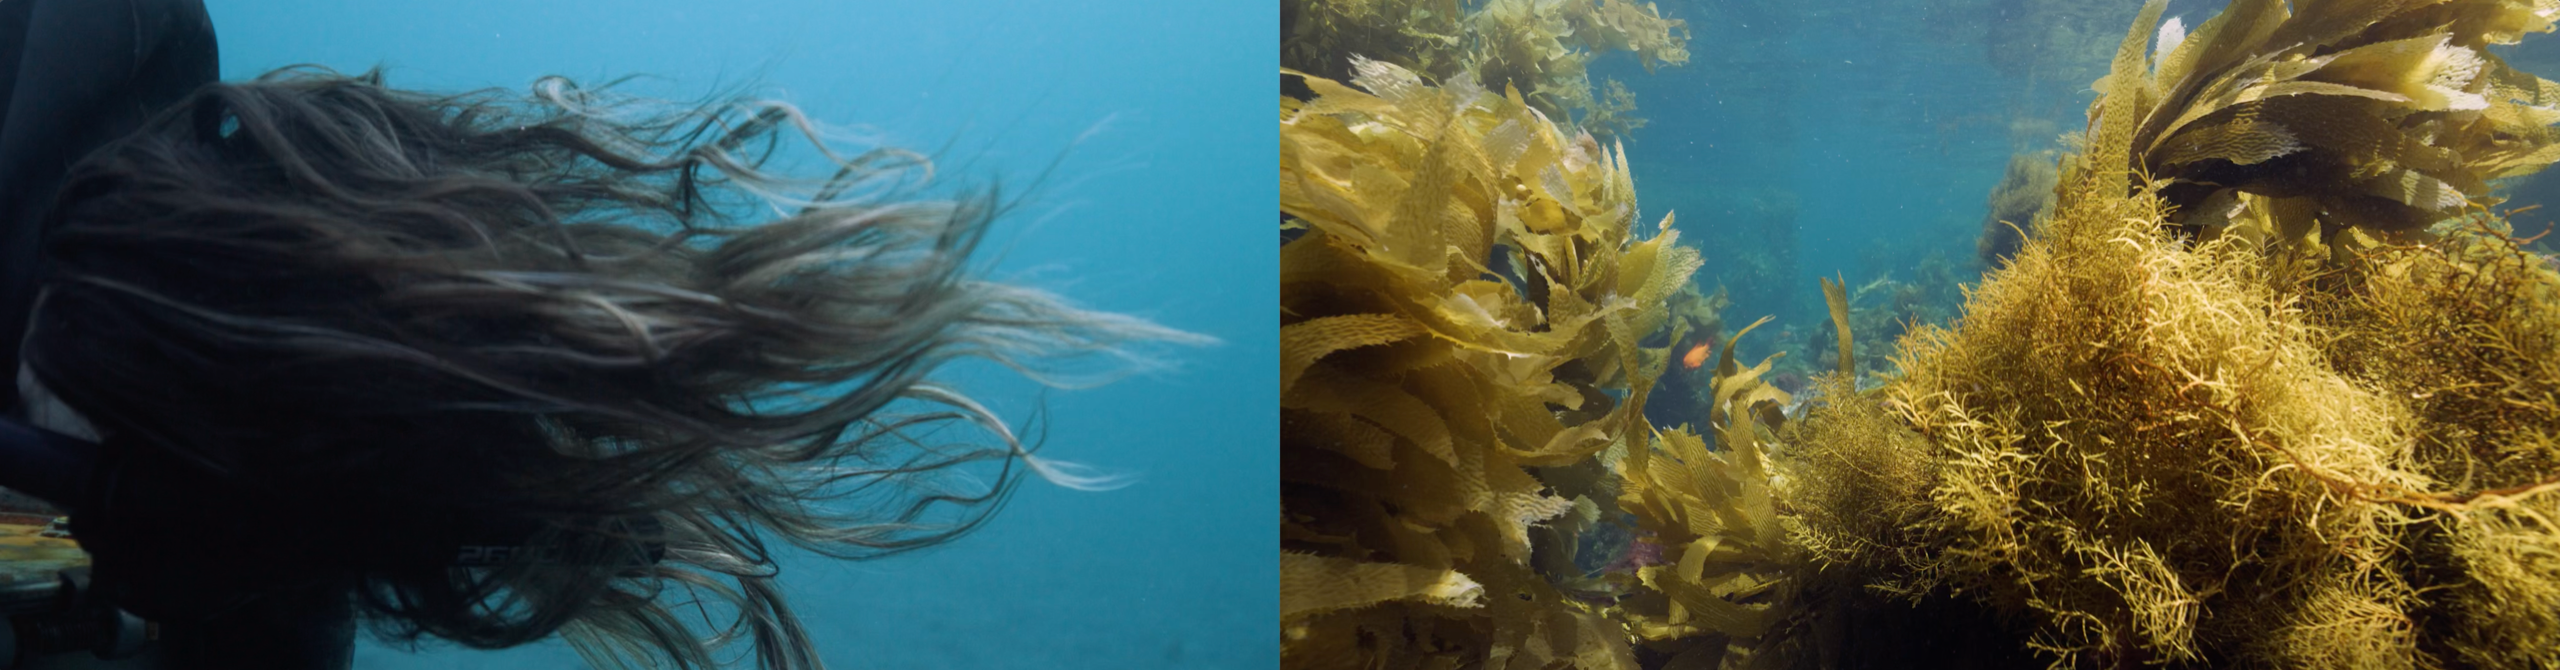 there are two frames, on the left a detail of hair floating underwater, on the right kelp underwater